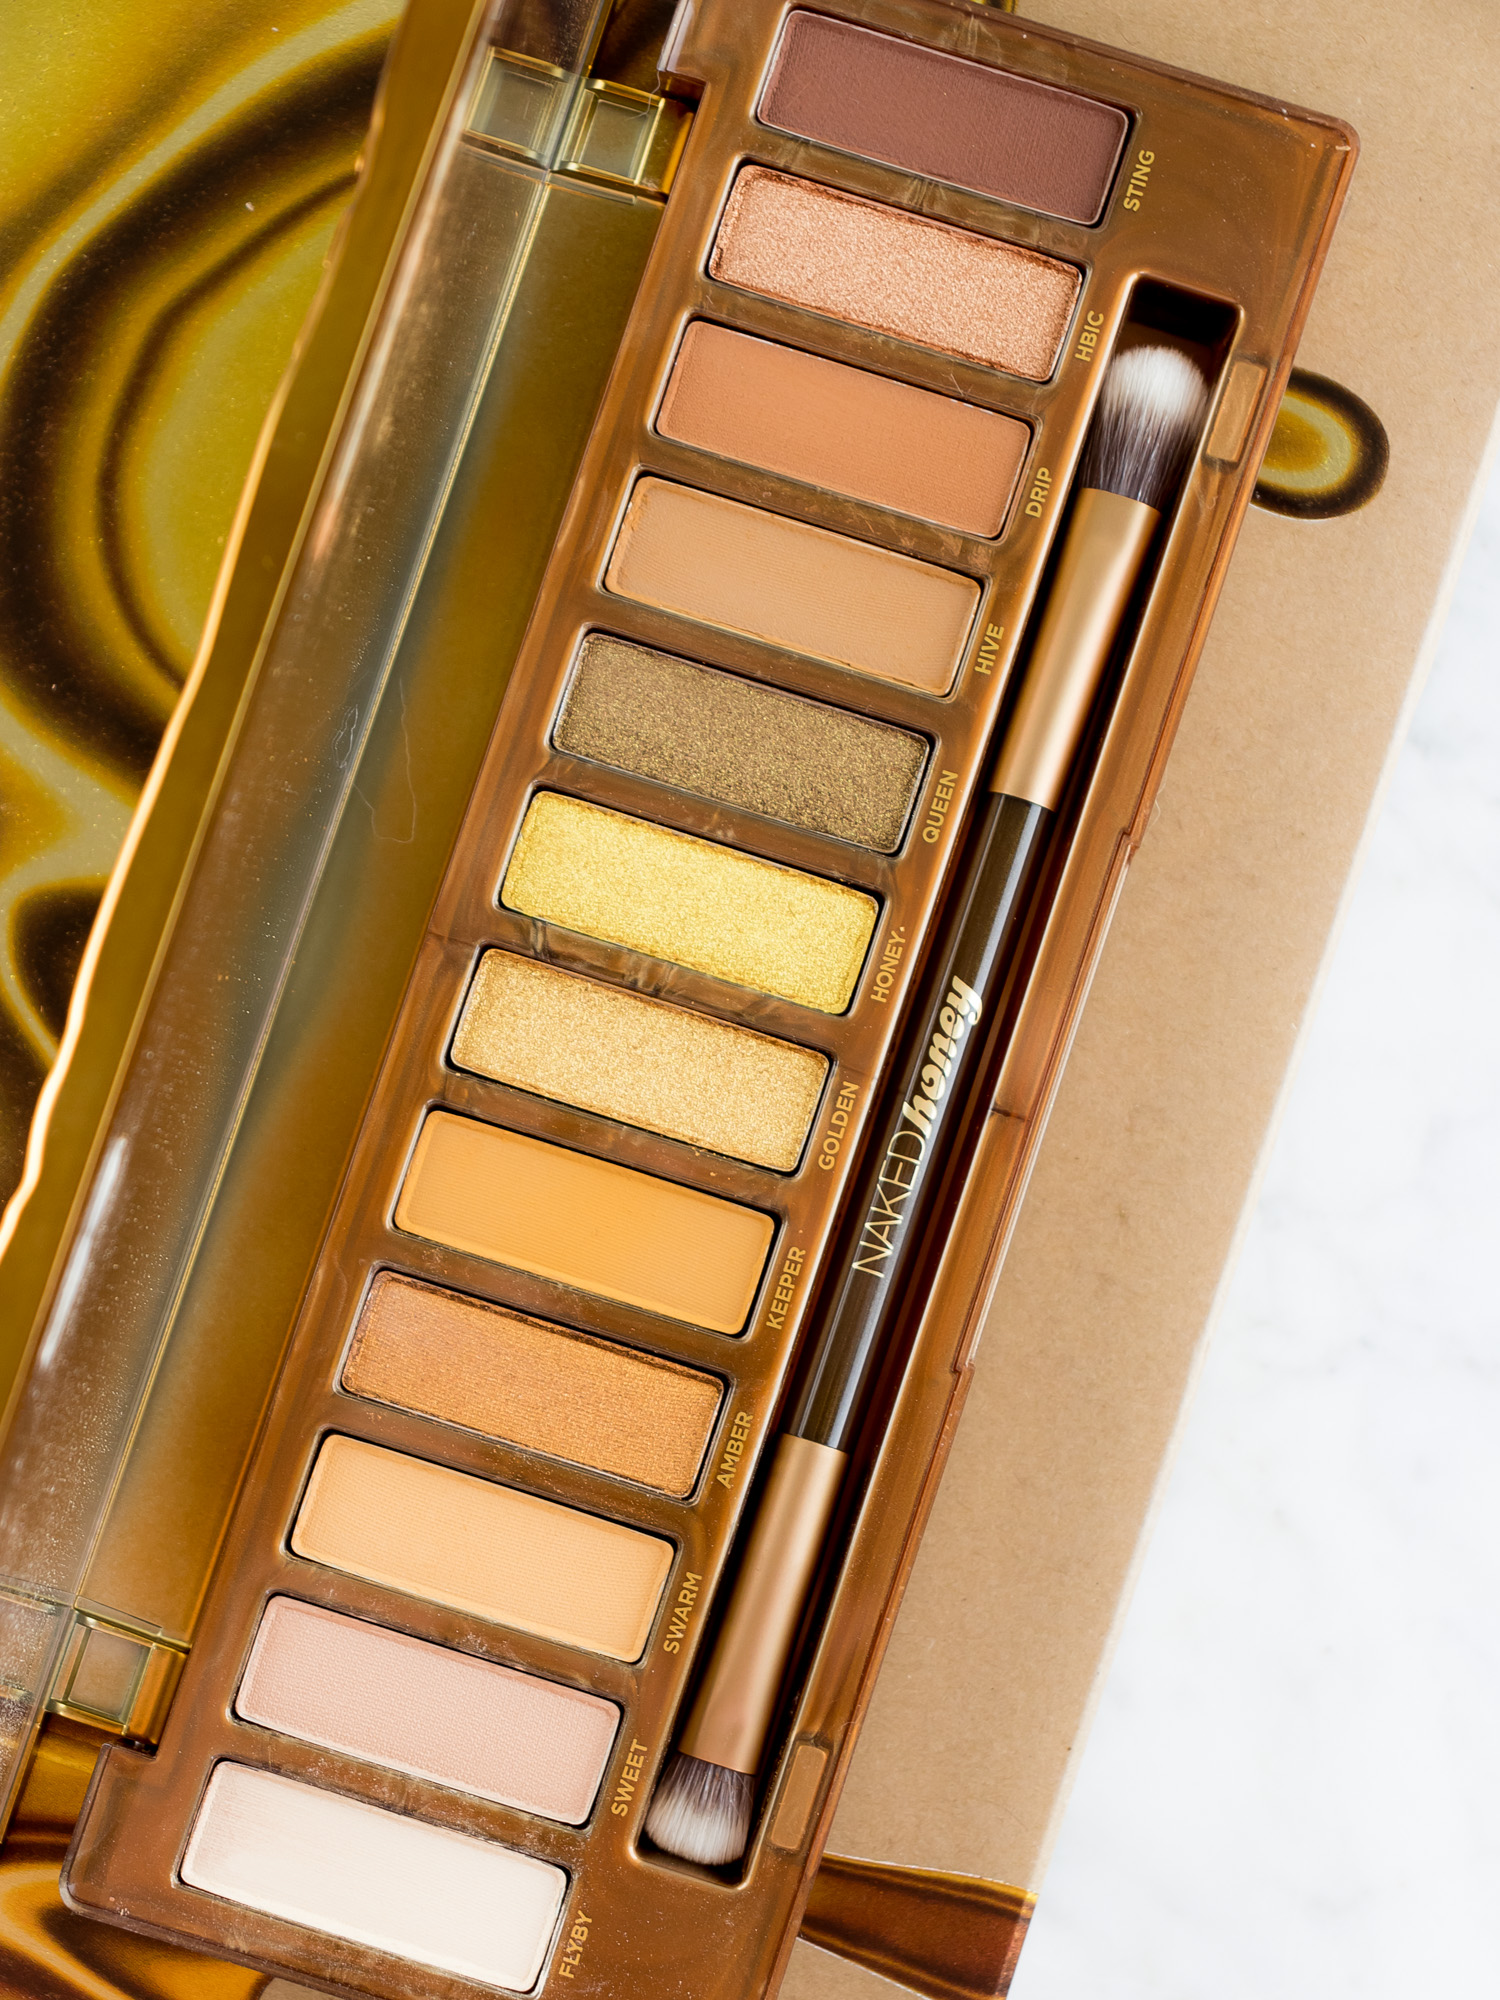 Urban Decay Launches NAKED Honey Eyeshadow Palette - Essence